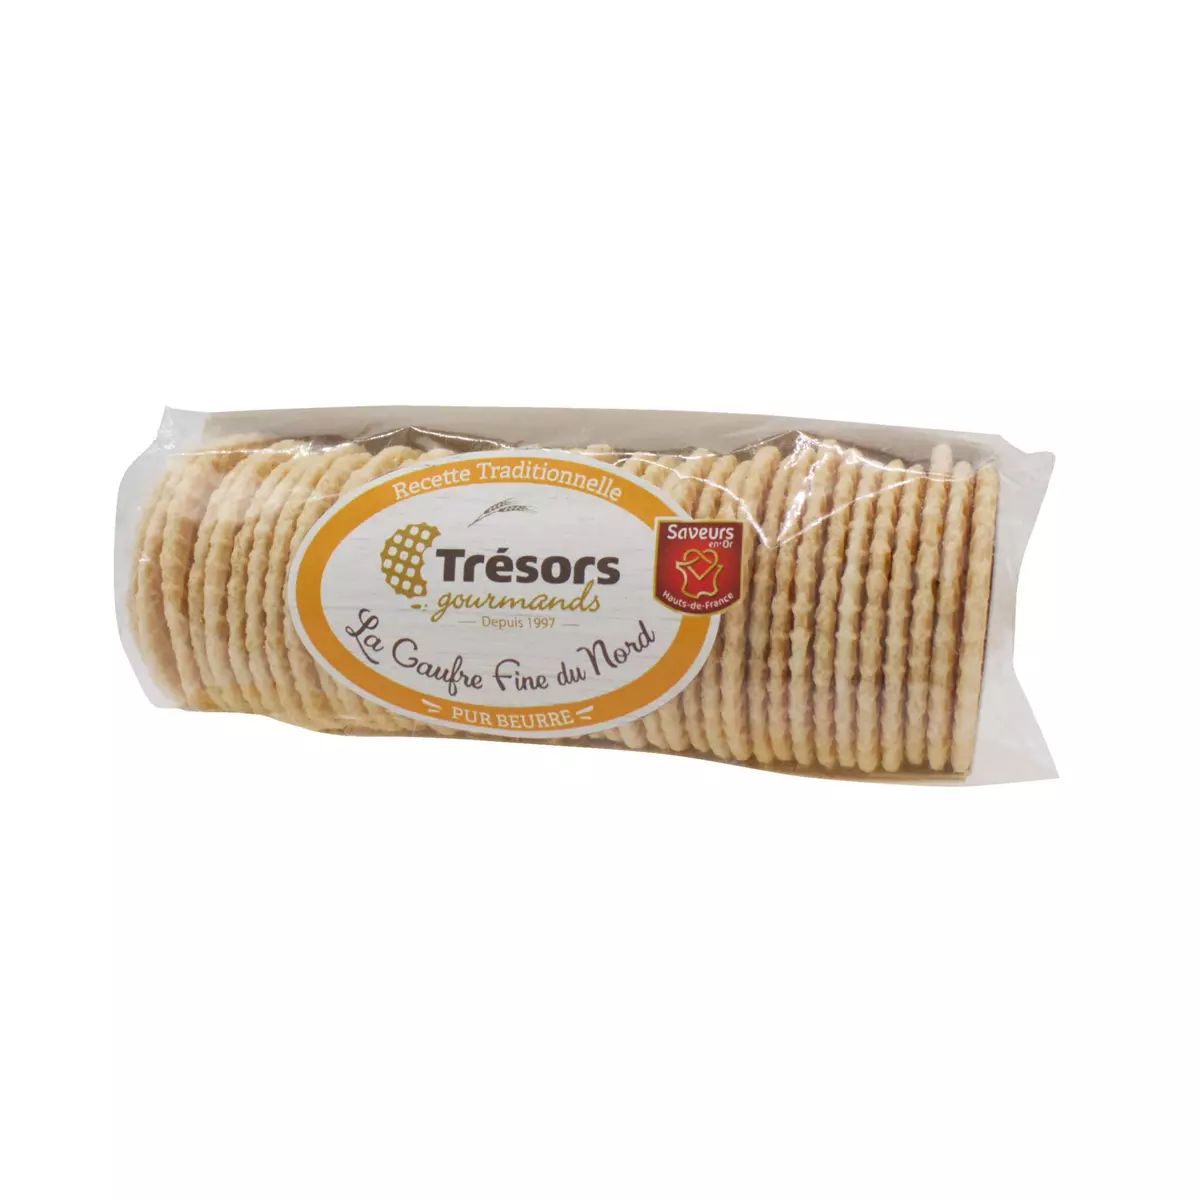 TRESORS GOURMANDS Gaufres fines du Nord pur beurre 220g